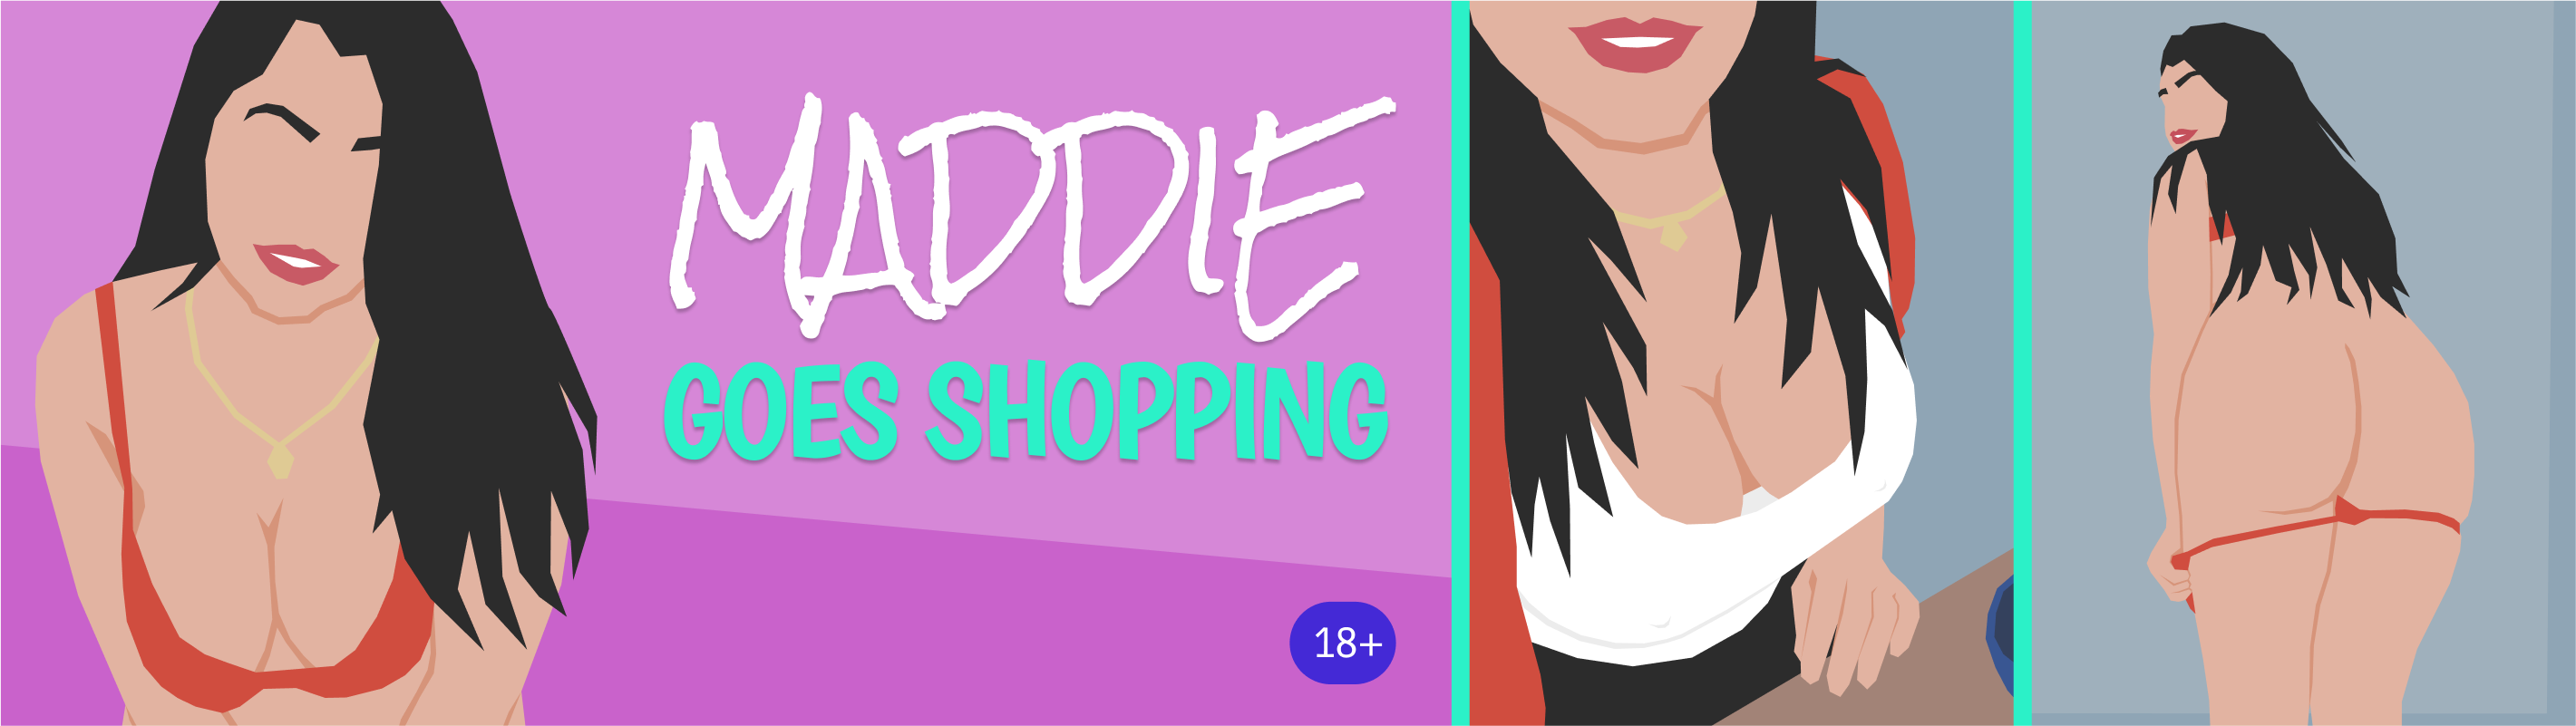 Maddie Goes Shopping poster